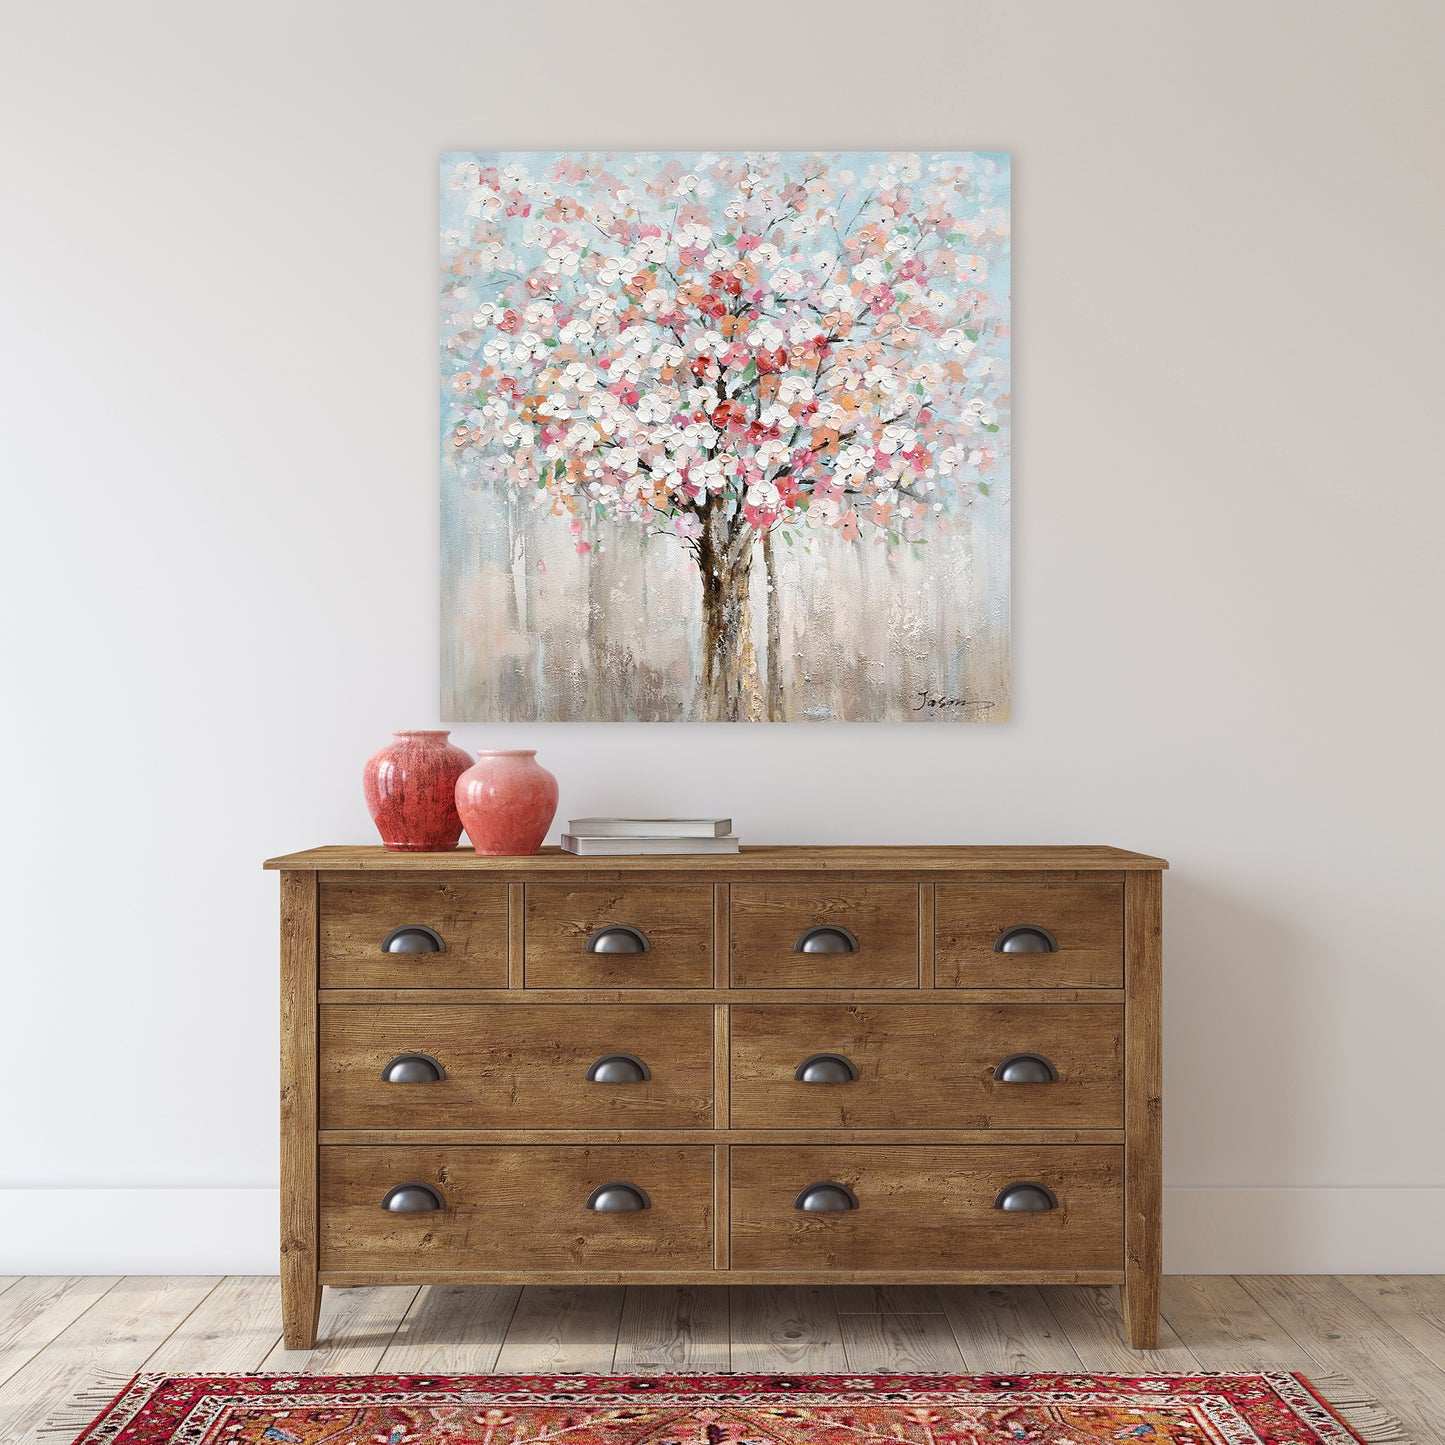 Hand-painted Art "Romantic flower tree" painting on canvas original, Wall art for living room, bedroom, office - Wrapped Canvas Painting